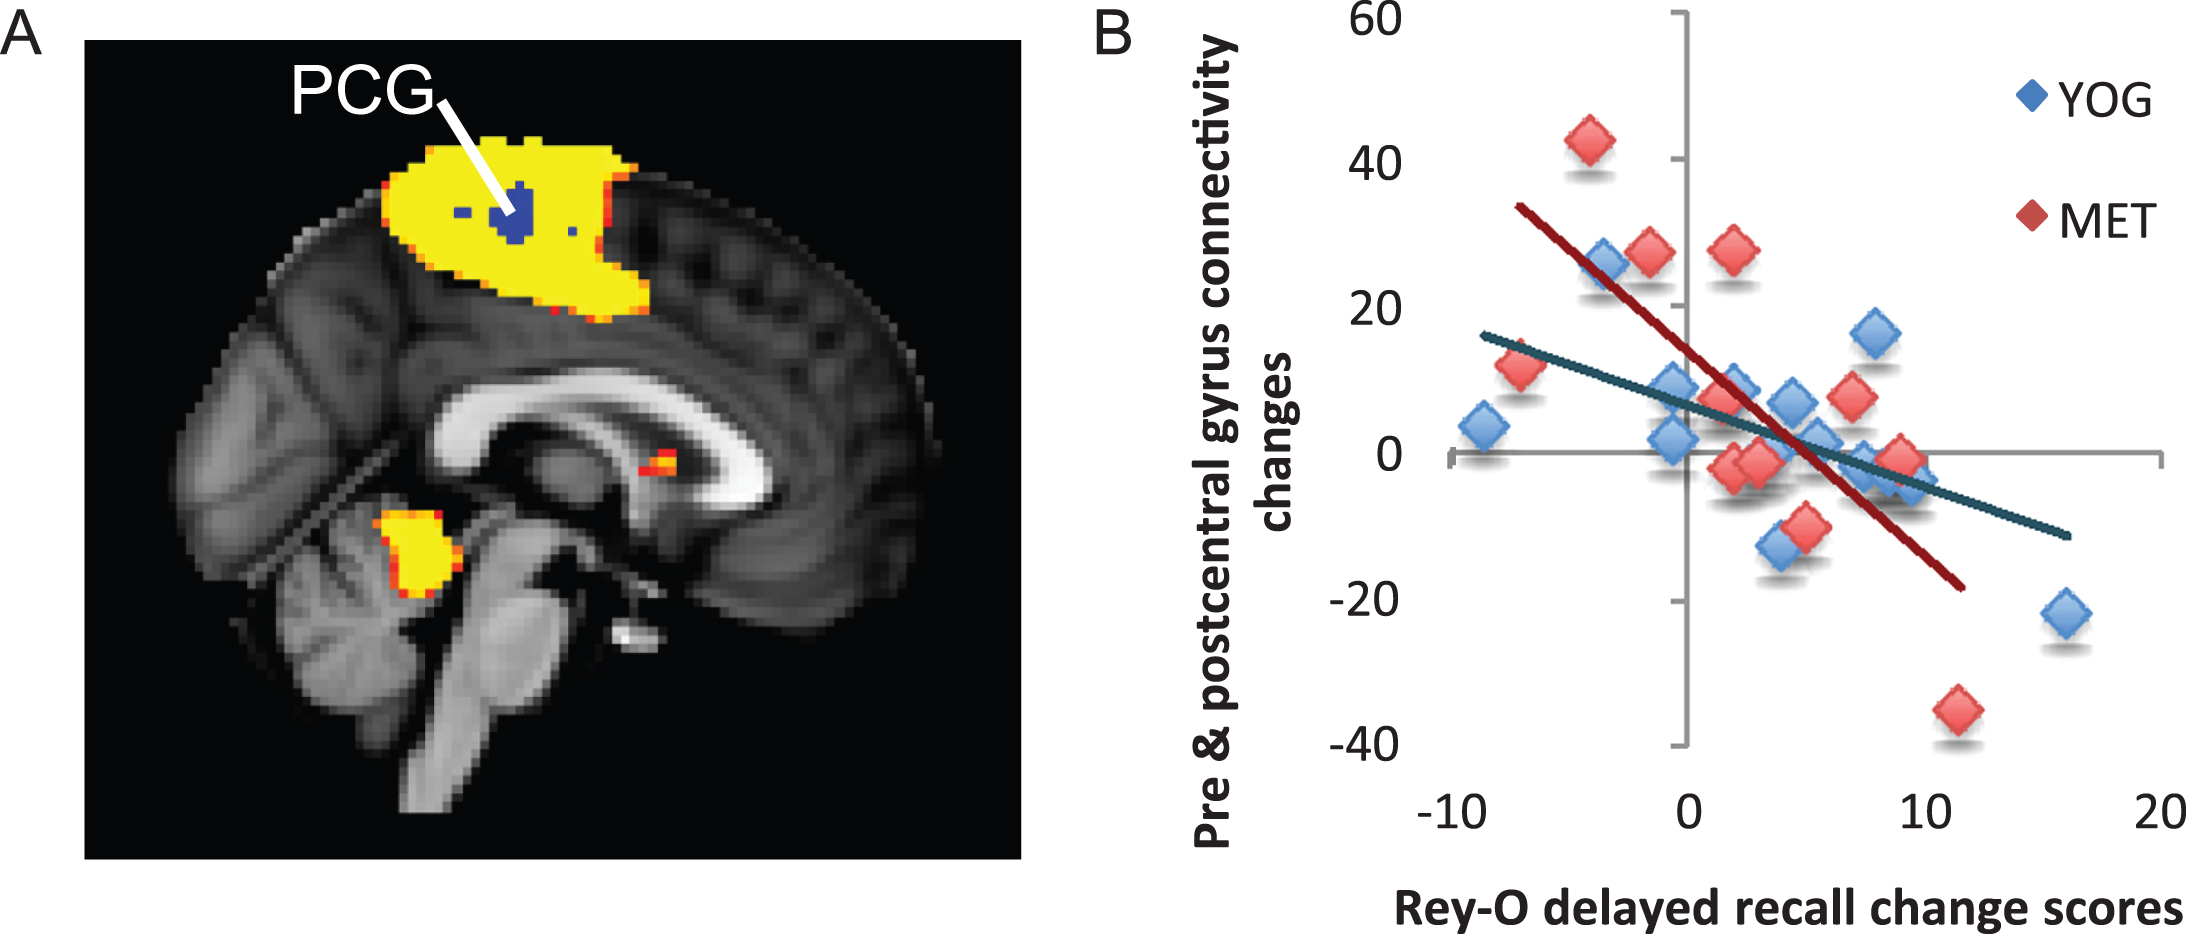 Changes in functional connectivity within the superior parietal network correlated with changes in visuospatial memory. A) The superior parietal resting-state network is displayed in yellow on a template brain. A single region near the pre- and post-central gyri (PCG) showed significant negative correlation between changes in connectivity with the superior parietal network and changes in visuospatial memory measured by the Rey-Osterrieth Complex Figure Test (Rey-O). This cluster is displayed in blue (z <  2.3, p <  0.05, corrected). B) A scatter figure displays the negative correlation for the PCG cluster displayed in A for the yoga (YOG, blue) and memory enhancement training (MET, red) groups. Trendlines are displayed for each group.